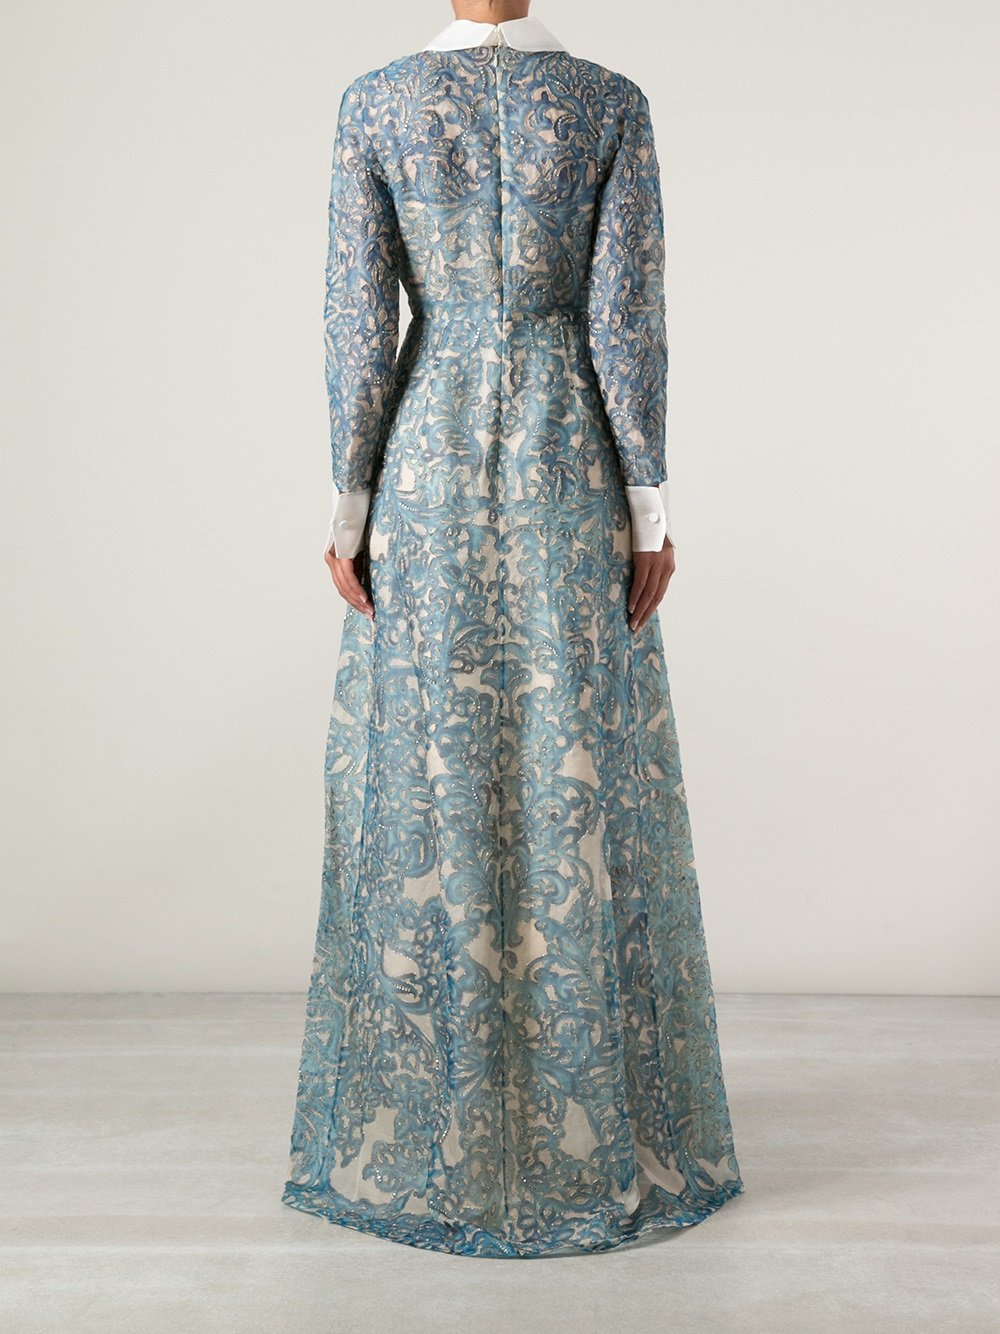 Valentino Embellished Maxi Dress in Blue - Lyst